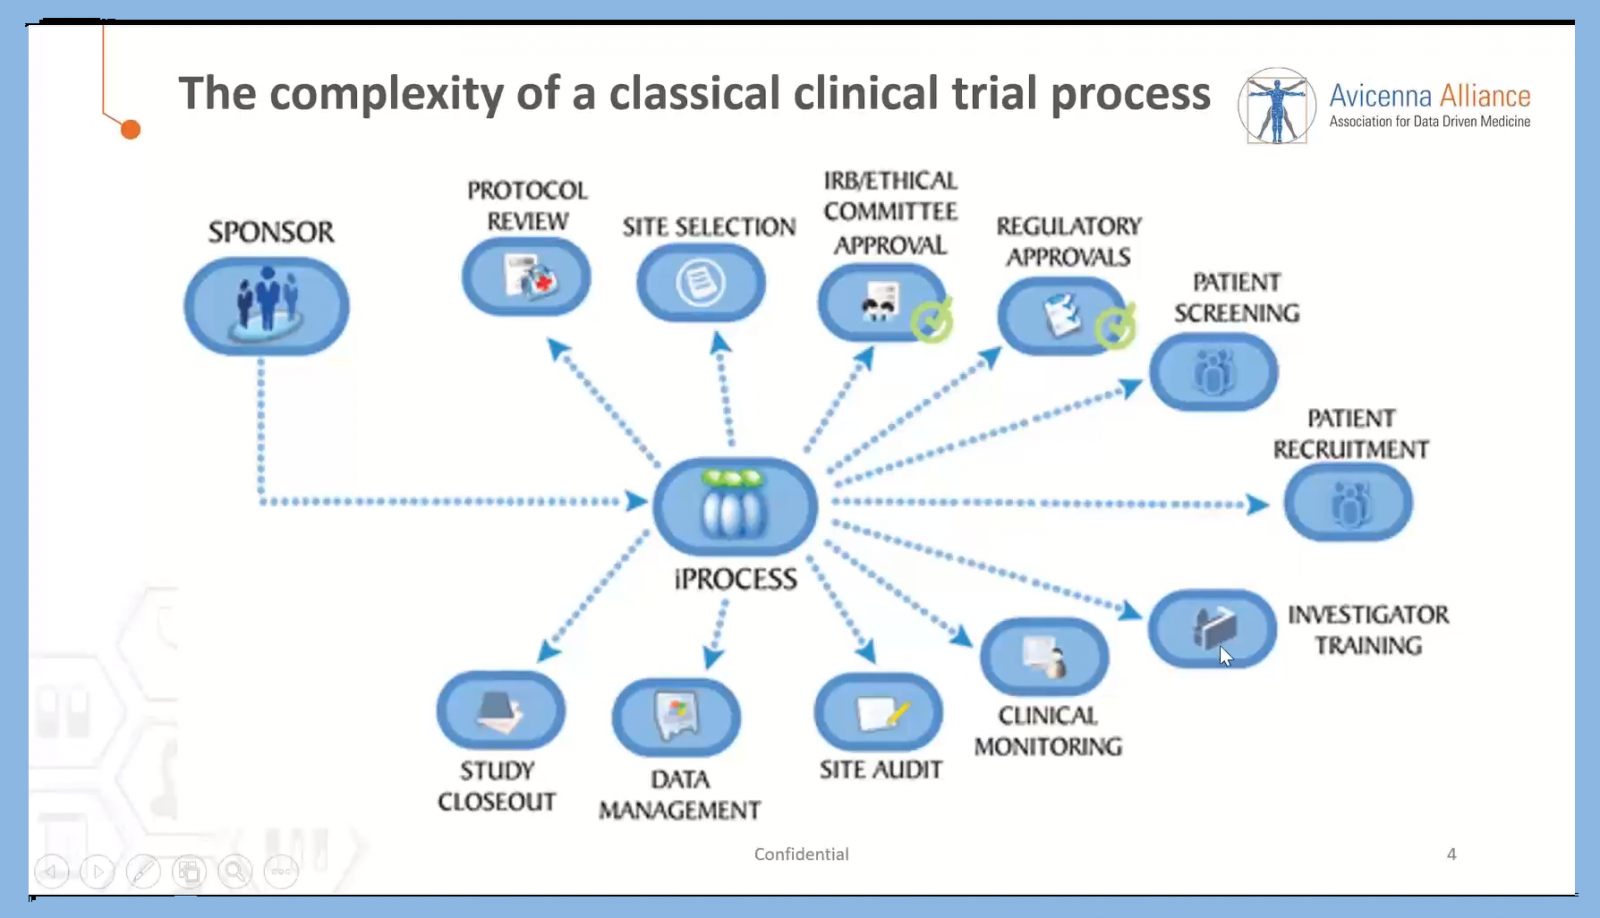 16 - “The role of a CRO in the management of a clinical trial: what we do today and what we could do tomorrow in an evolving scientific world“